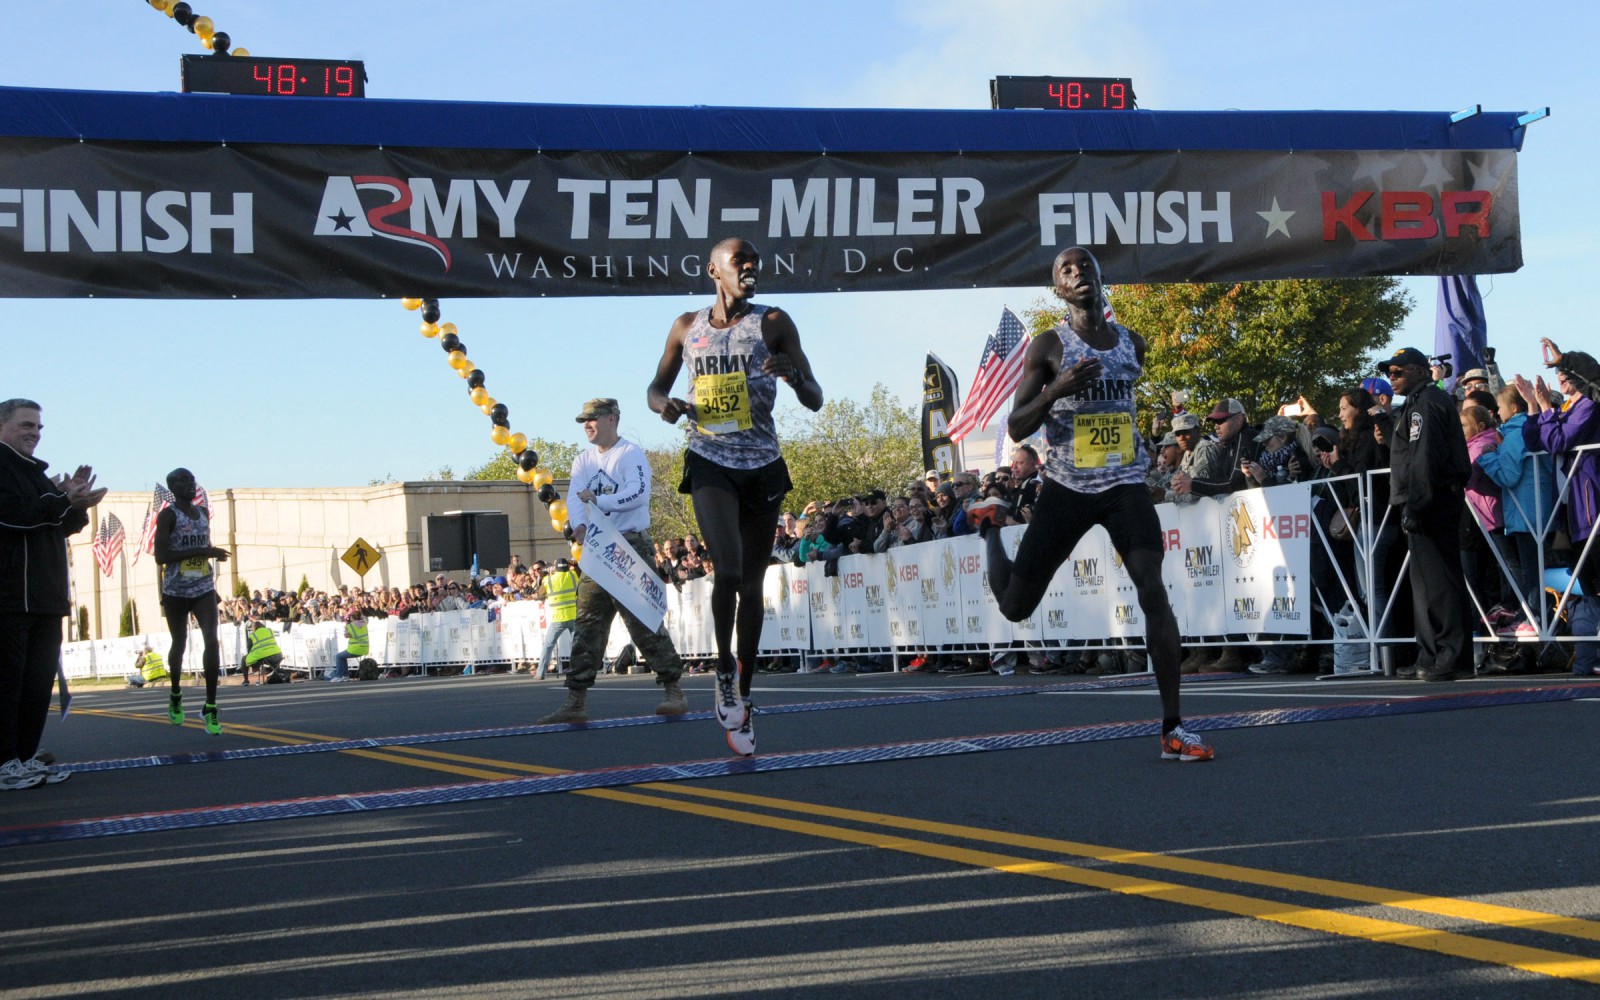 Soldiers and teammates Paul Chelimo and Nicholas Kipruto finish the Army Ten-Miler at 48:19 with Chelimo winning by seconds. Their teammate Shadrack Kipchirchir took third, Oct. 11, 2015, near the Pentagon in Arlington, Va. (Photo by Shannon Collins / U.S. Army)